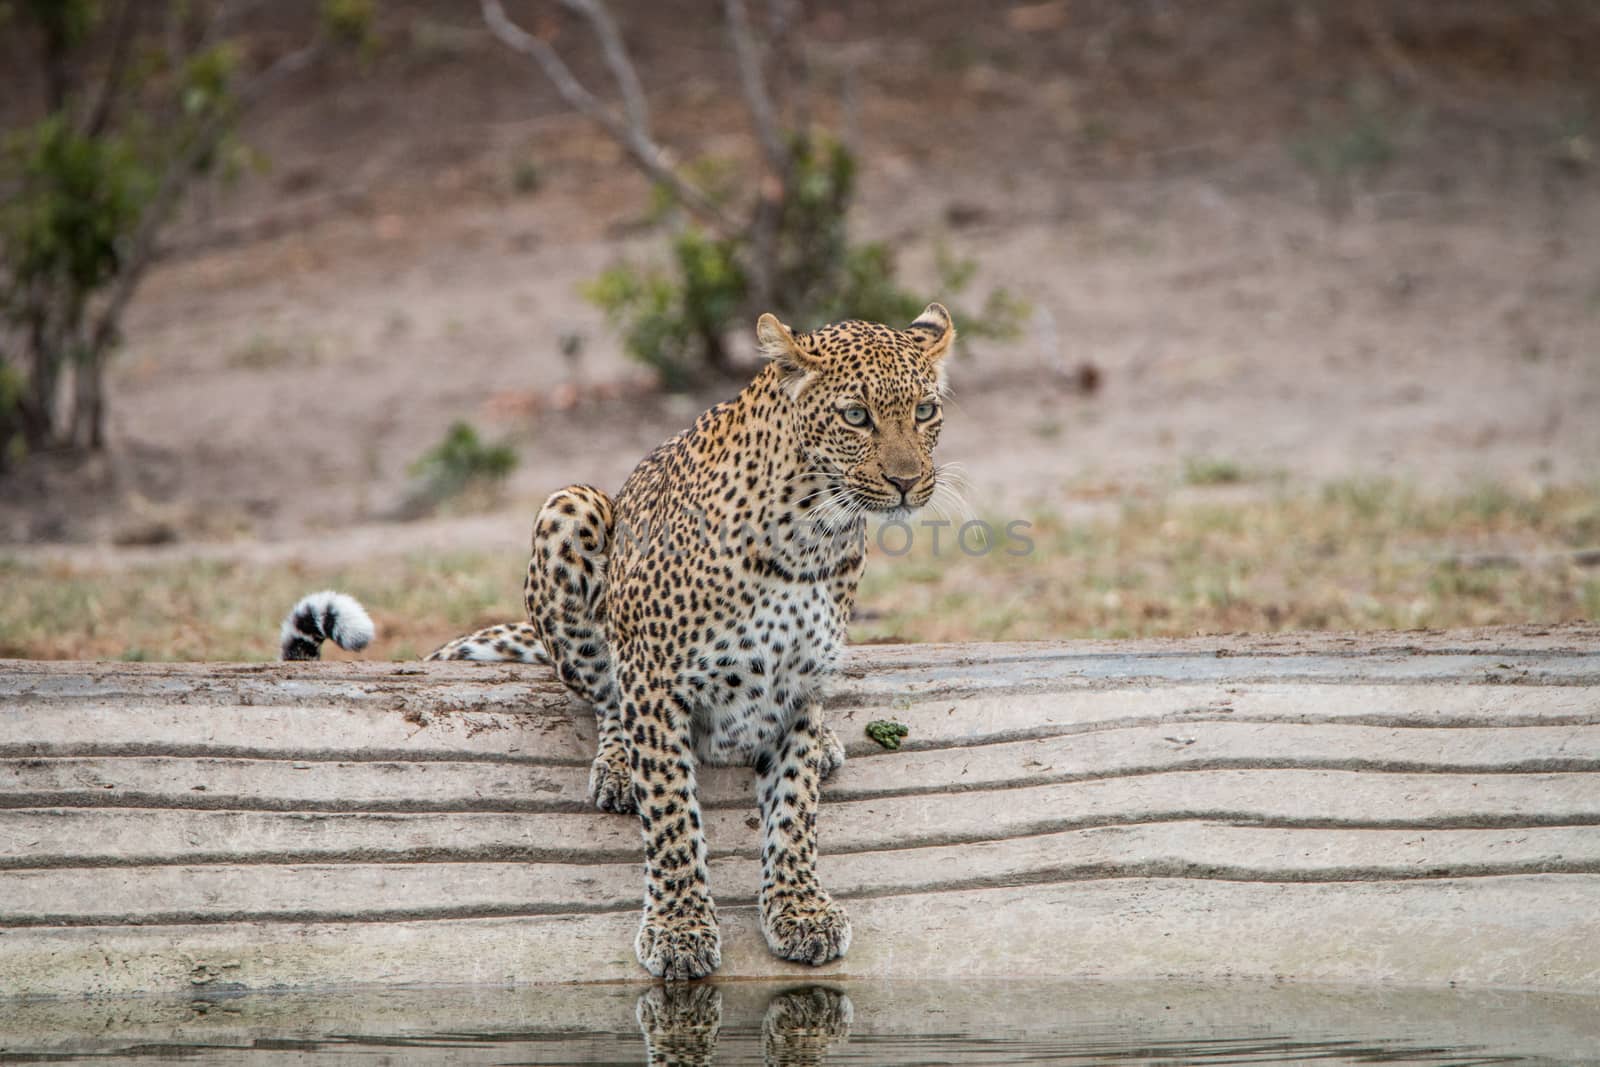 Leopard at a waterhole in the Kruger National Park by Simoneemanphotography